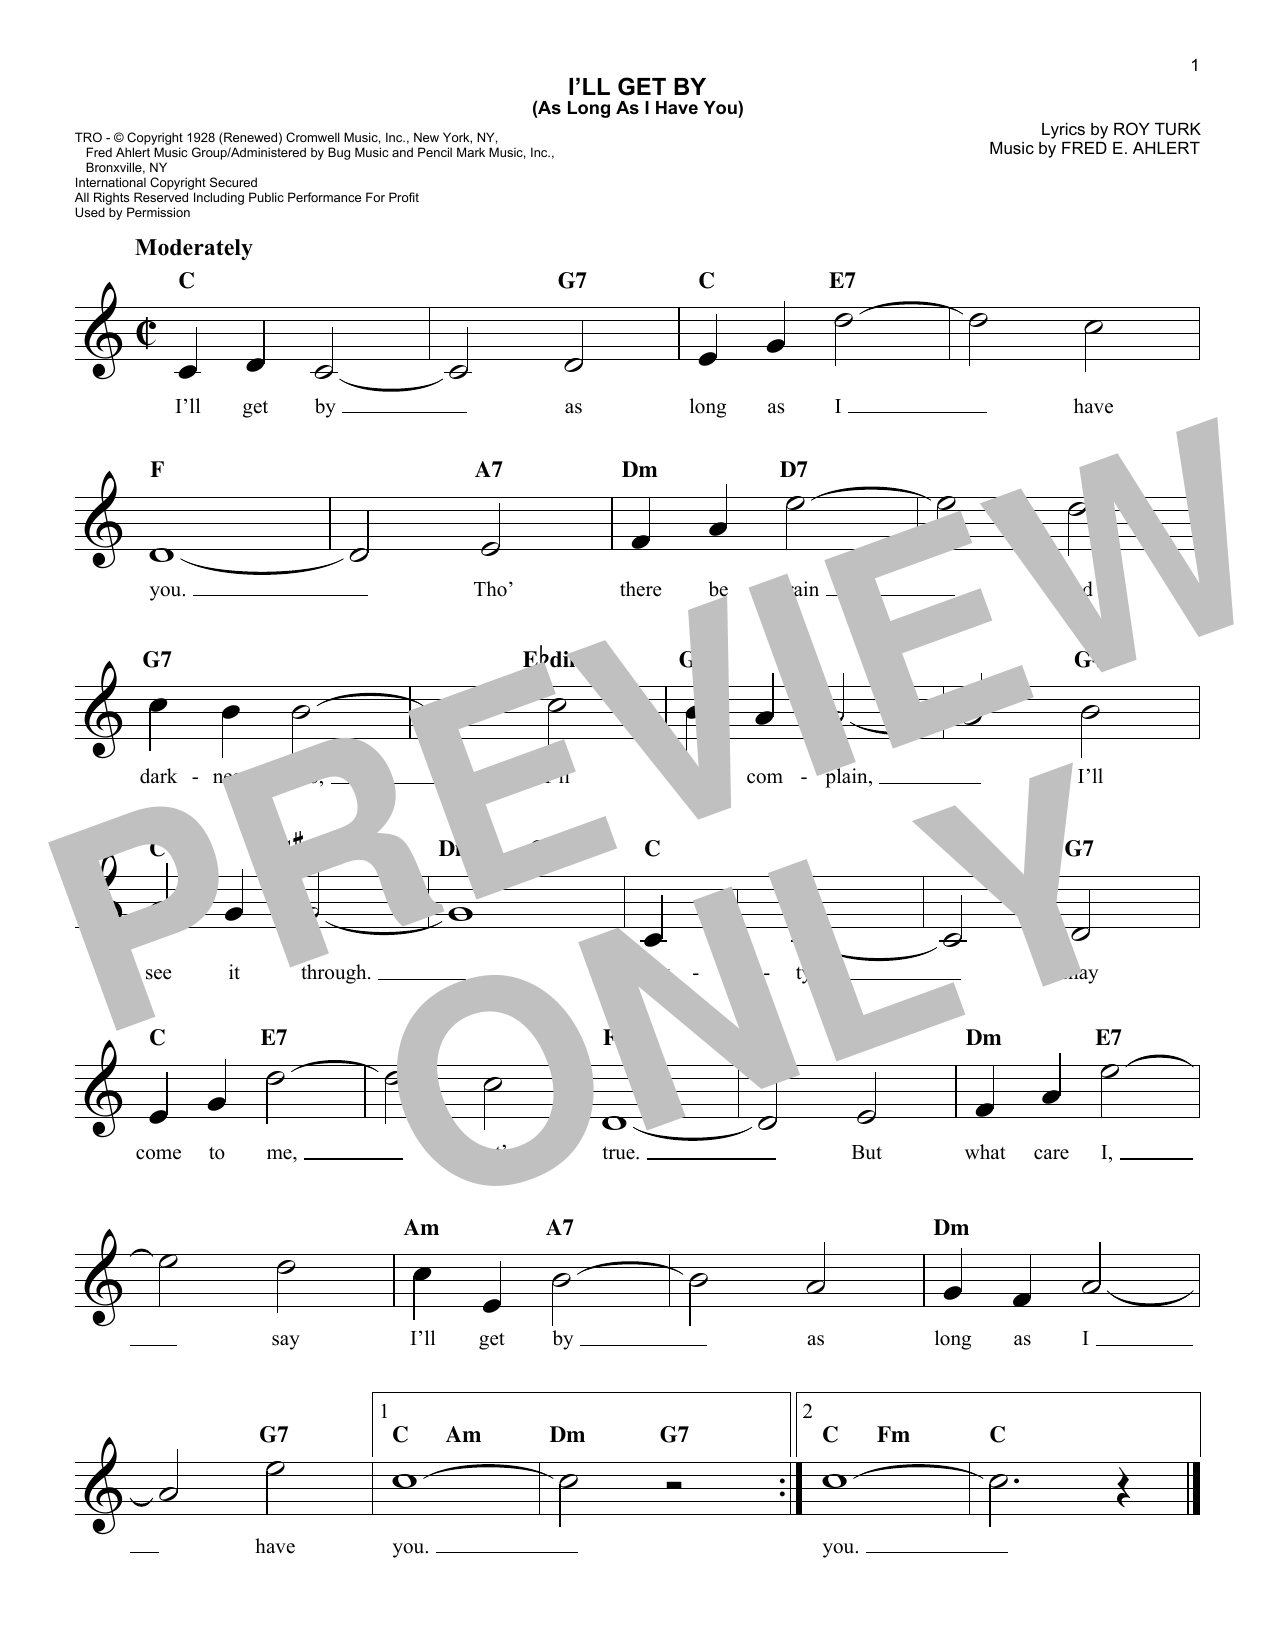 Download Fred E. Ahlert I'll Get By (As Long As I Have You) Sheet Music